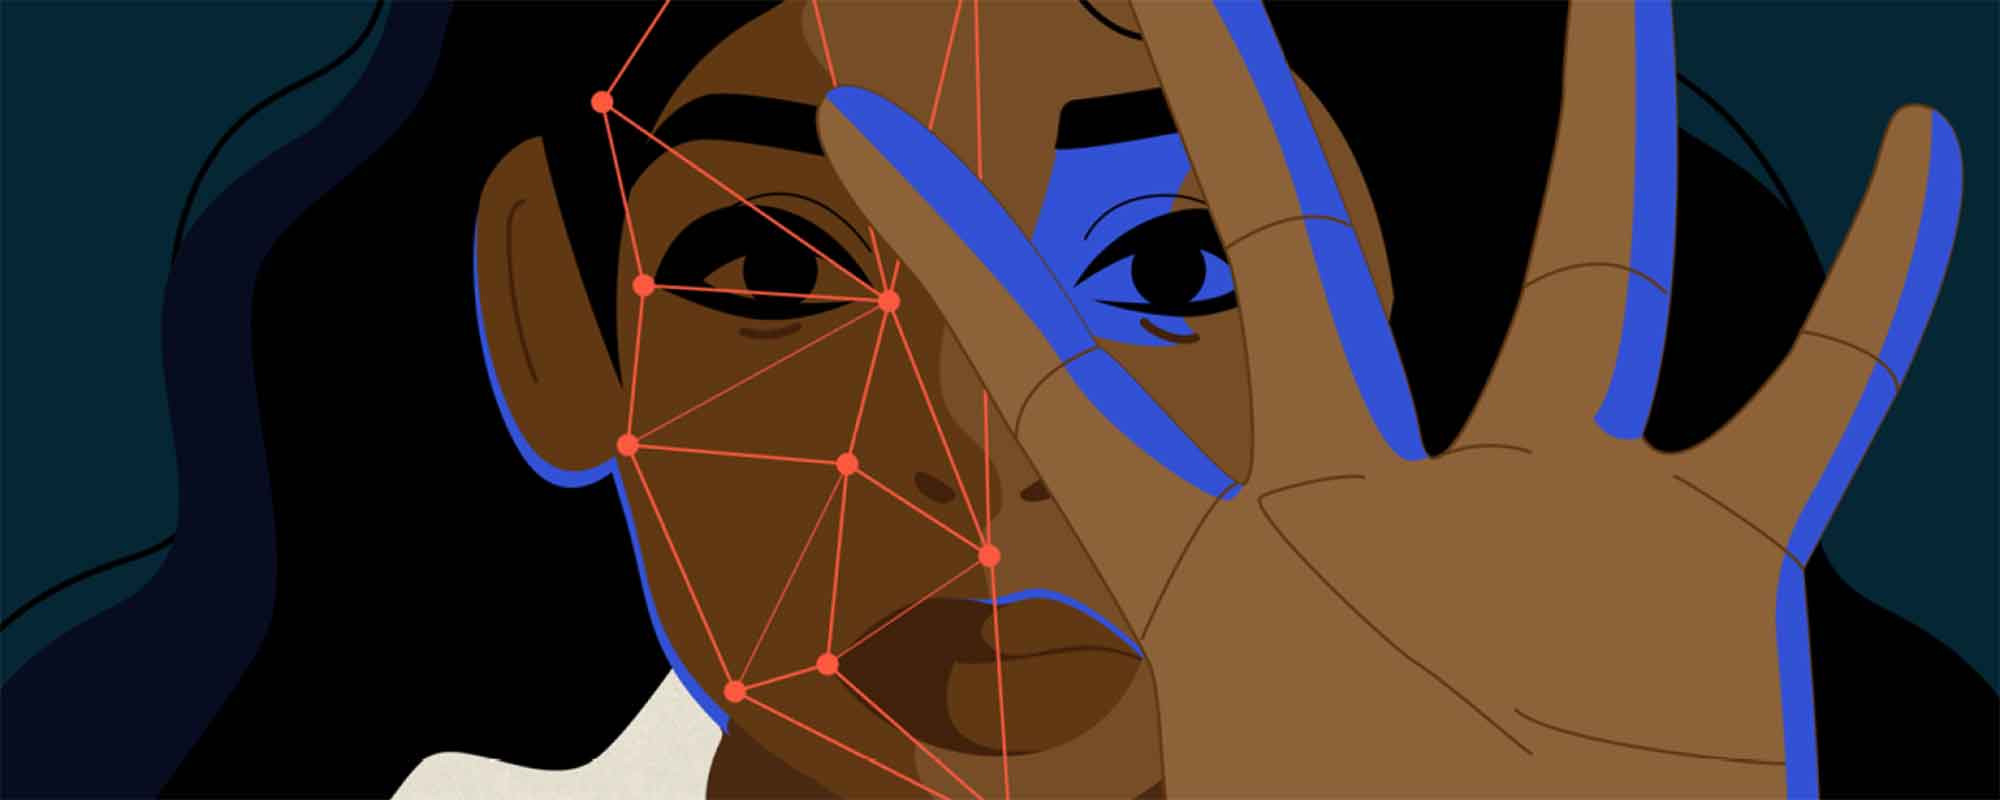 In Focus: Facial Recognition Tech Stories And Rights Harms From Around The World